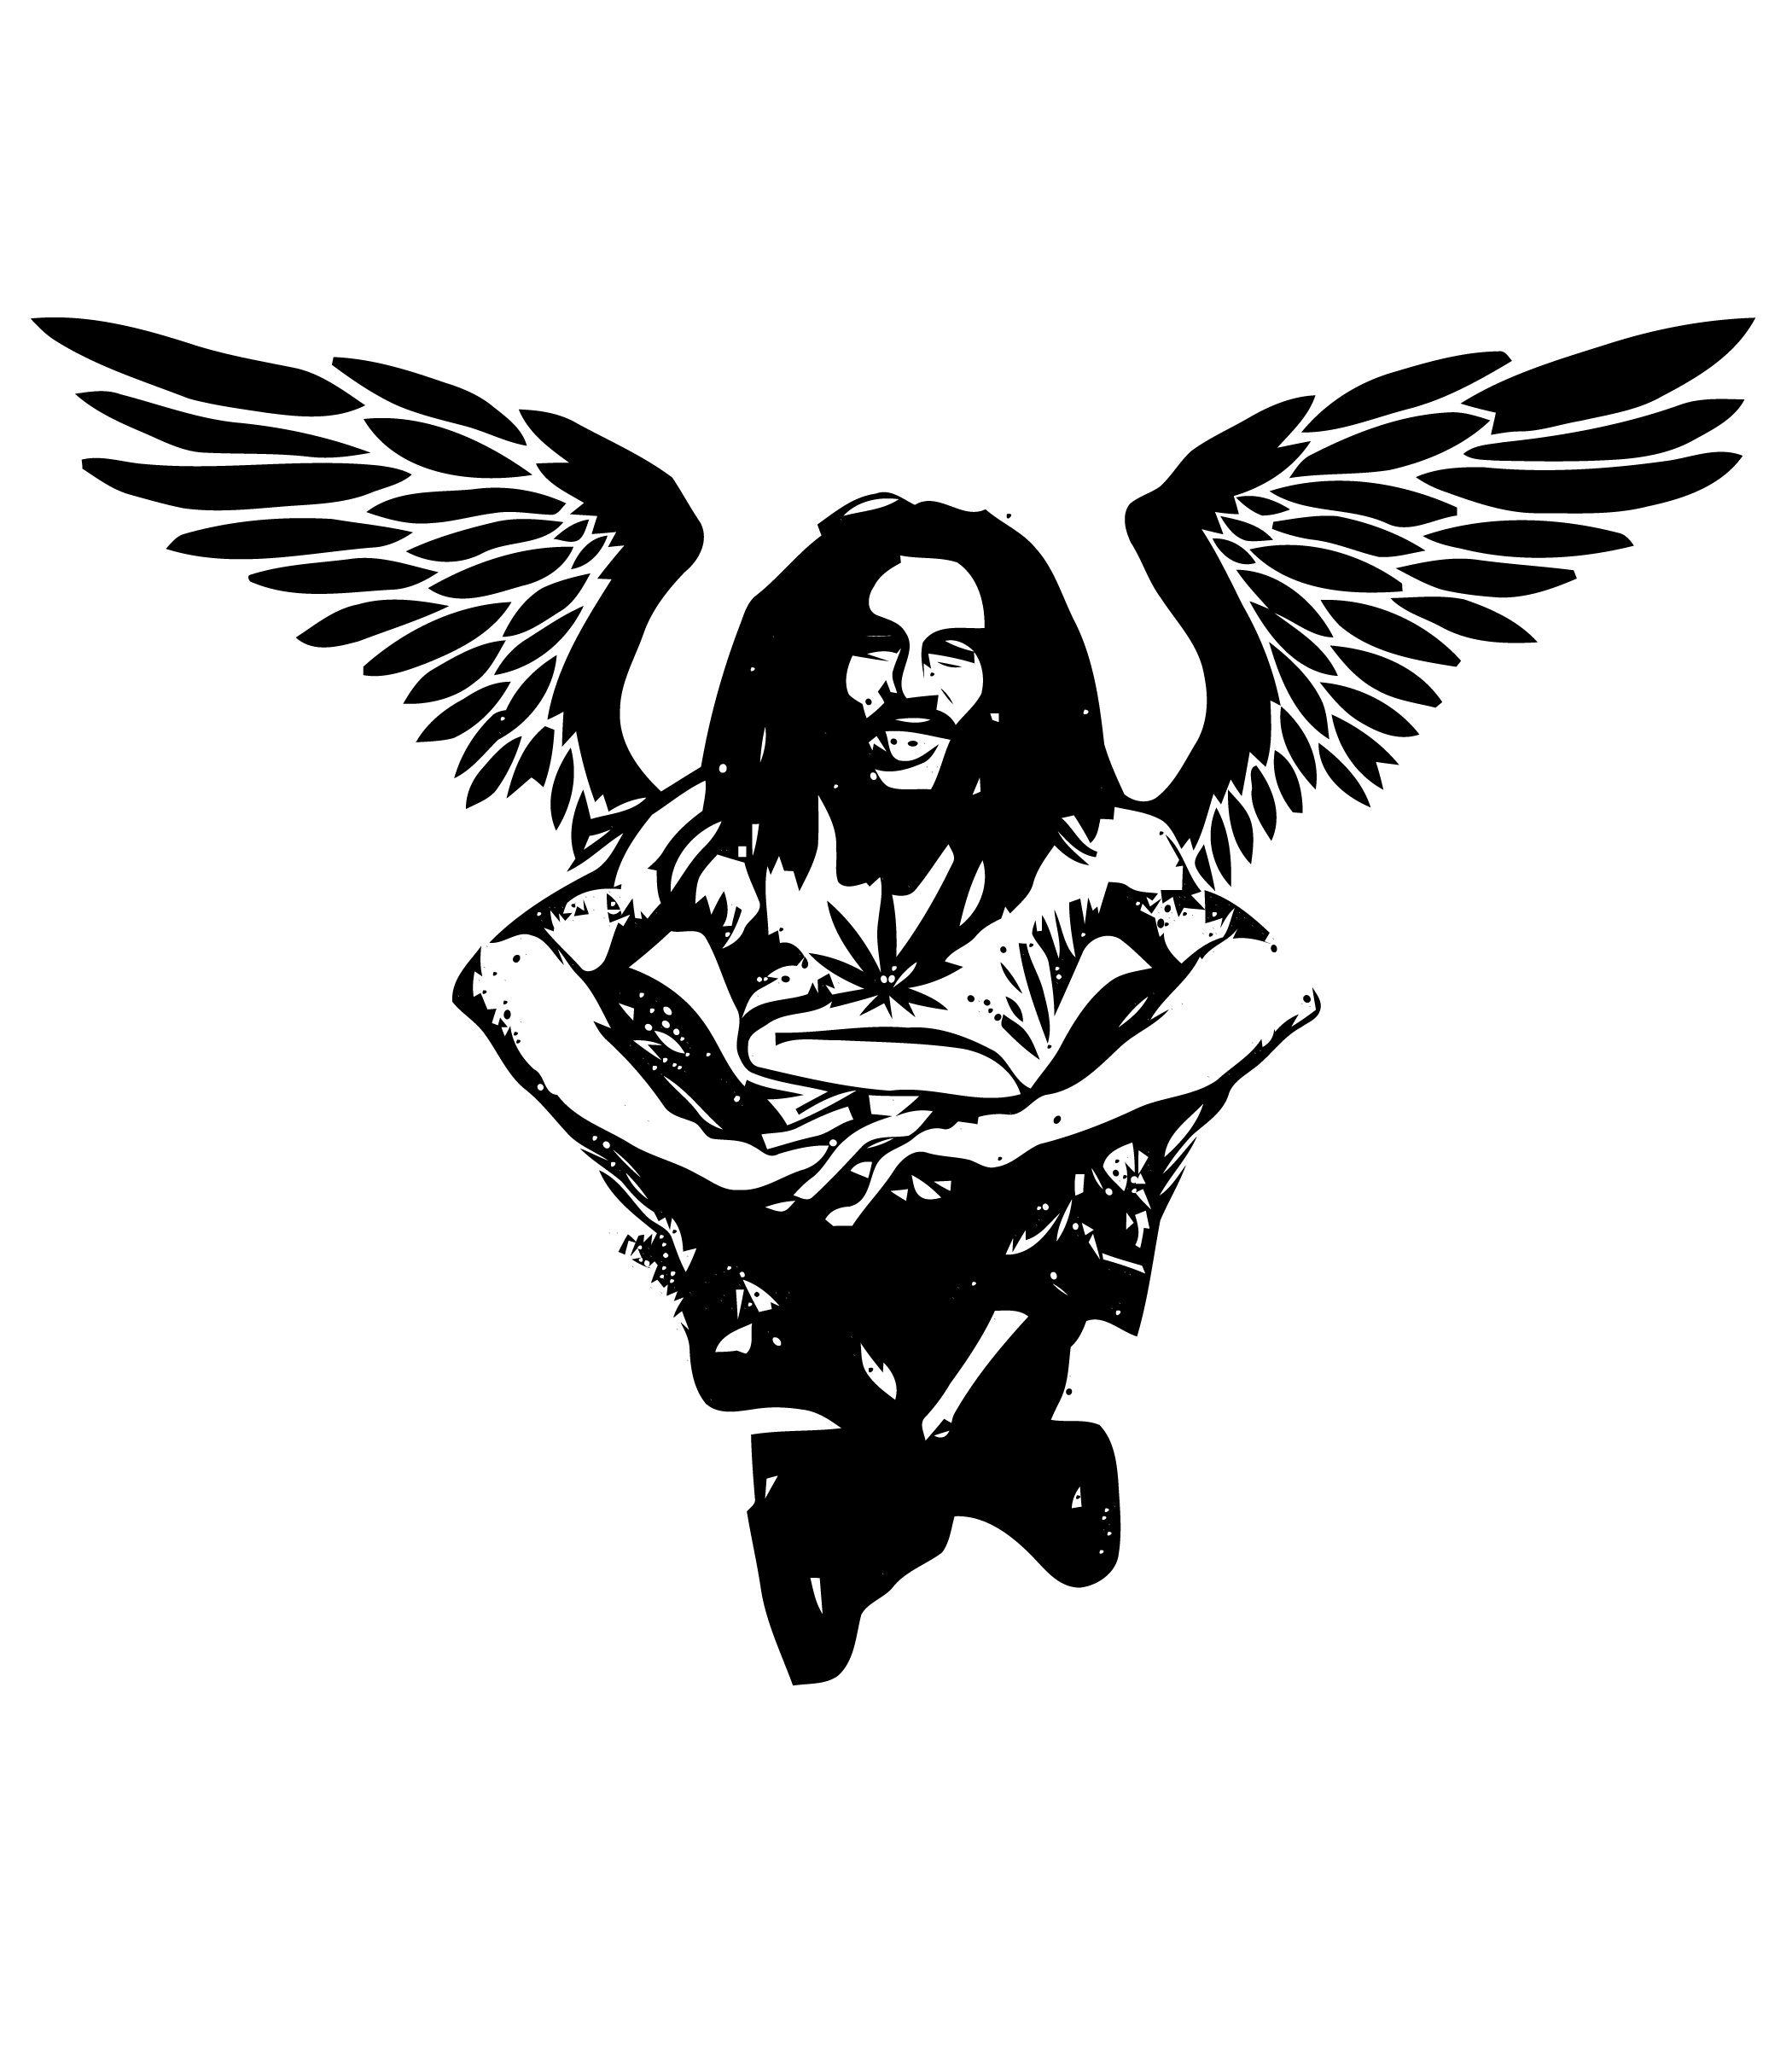 Bob Marley Black and White Logo - Natural Mystic, Marley at his best. T-Shirt Design By Filip Cocos ...